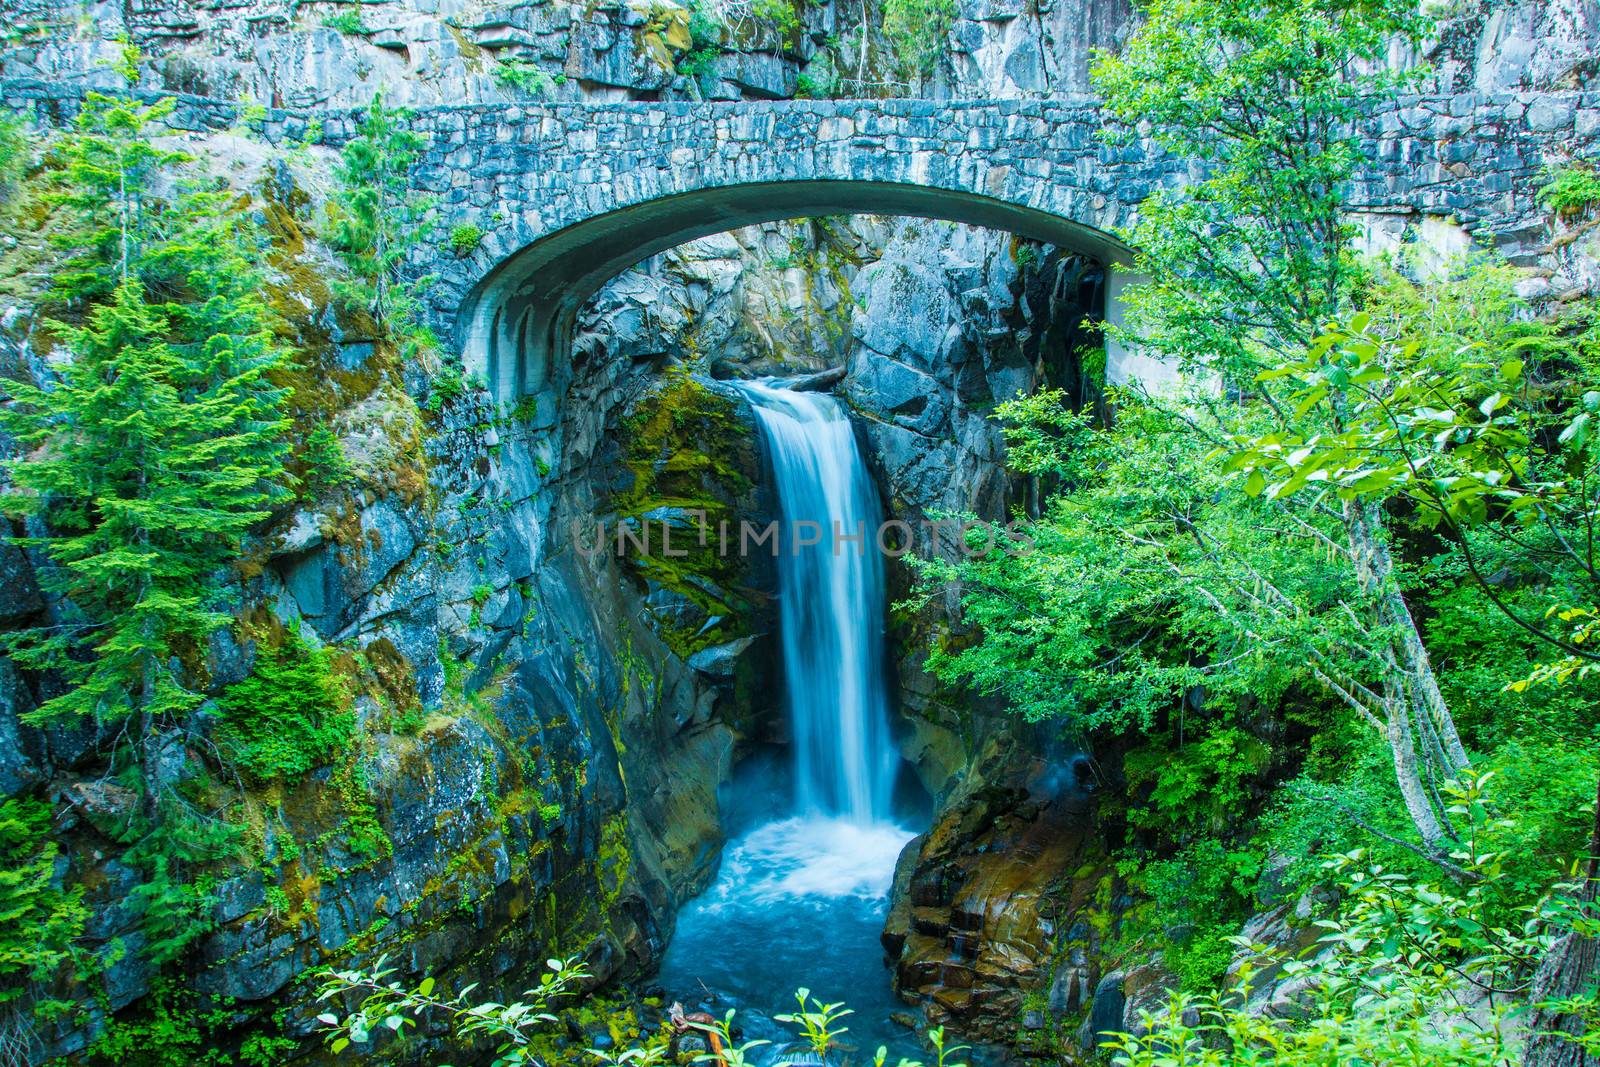 Mount Rainier NP, WA - One of the most iconic falls in the entire park, with its arched bridge to flow under